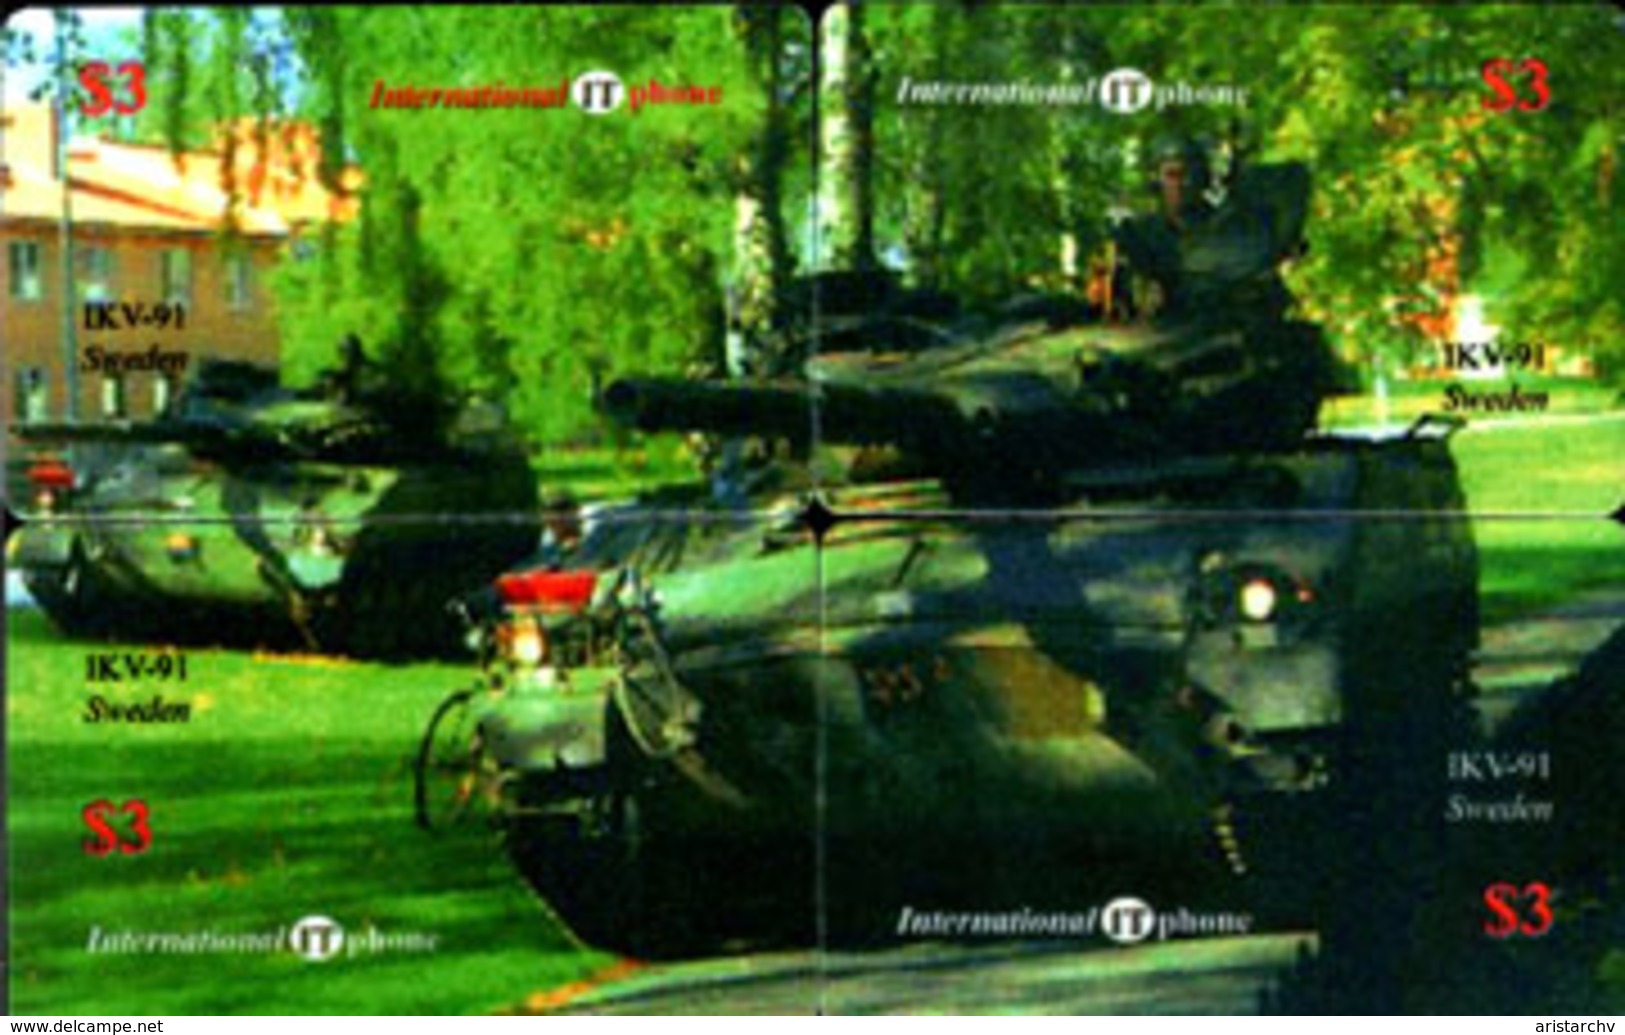 TANK IKV-91 PUZZLE OF 4 PHONE CARDS - Armee